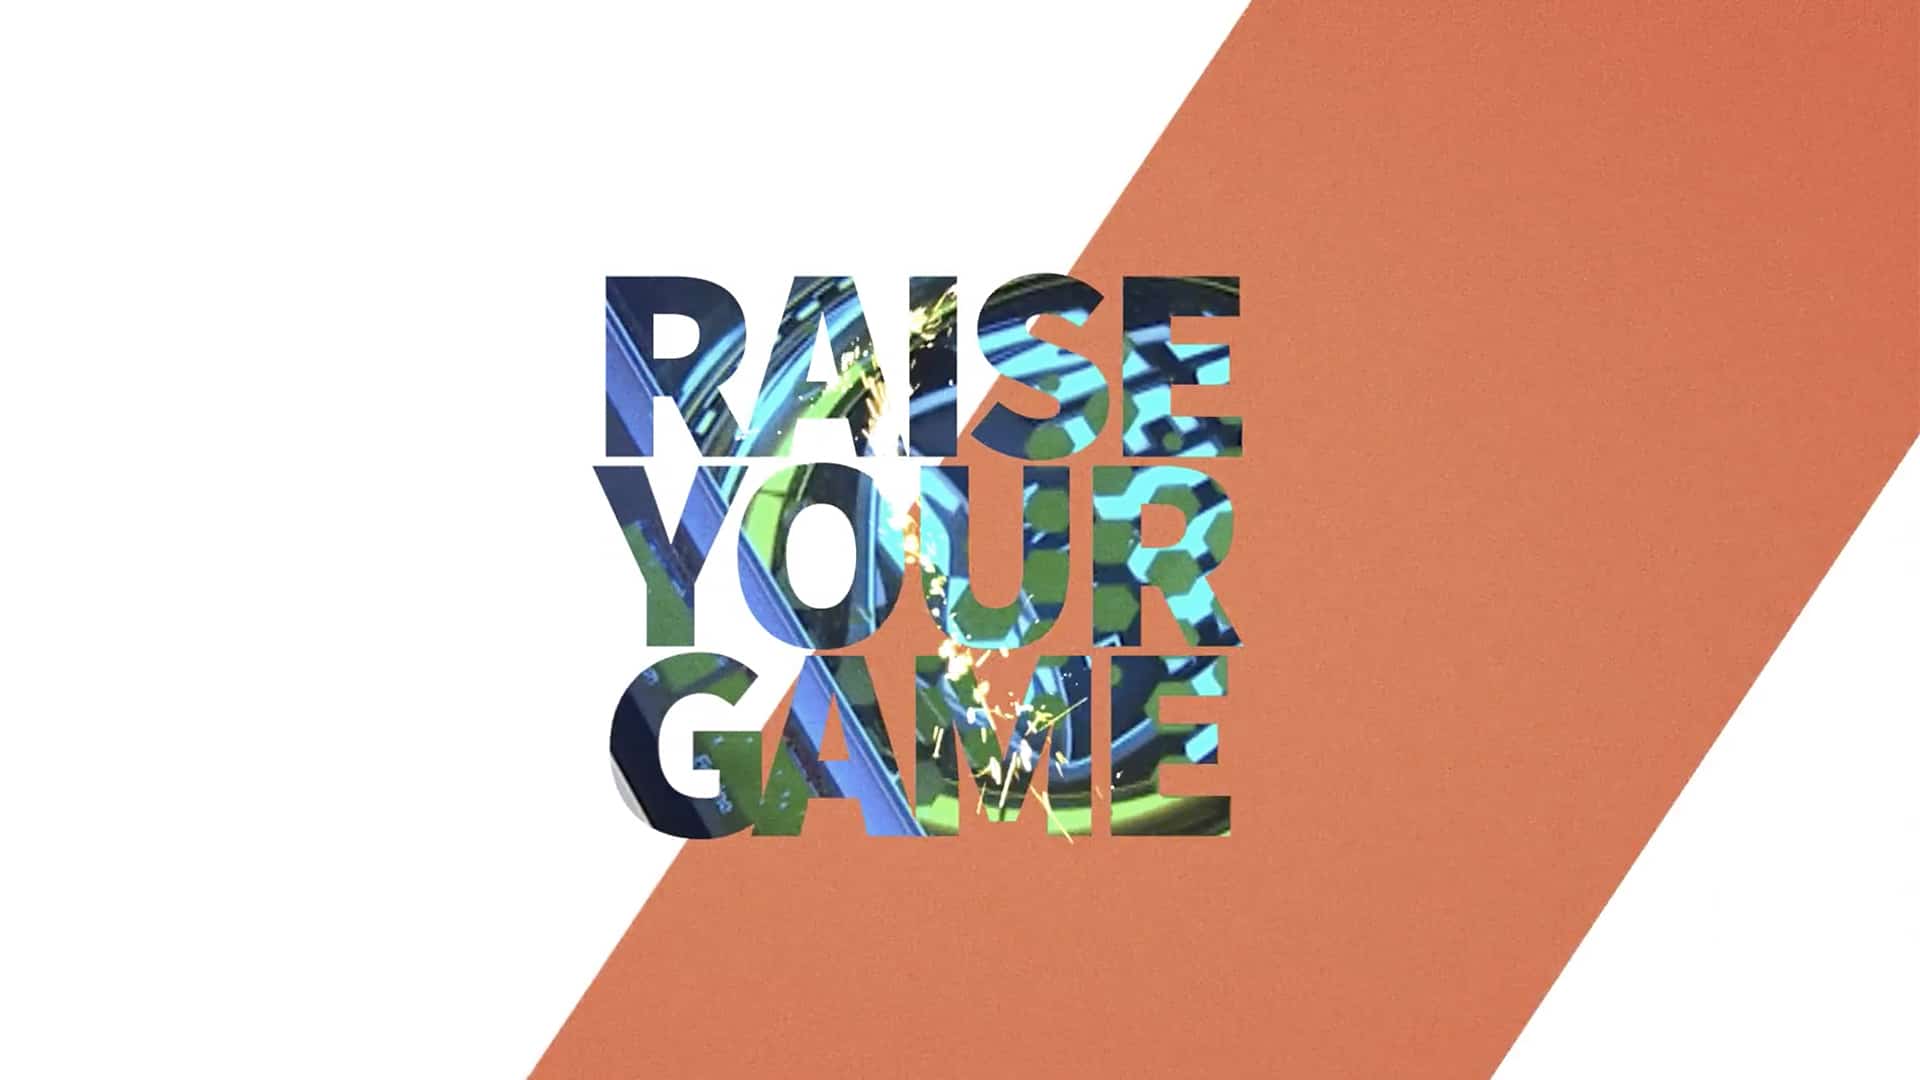 Raise your game